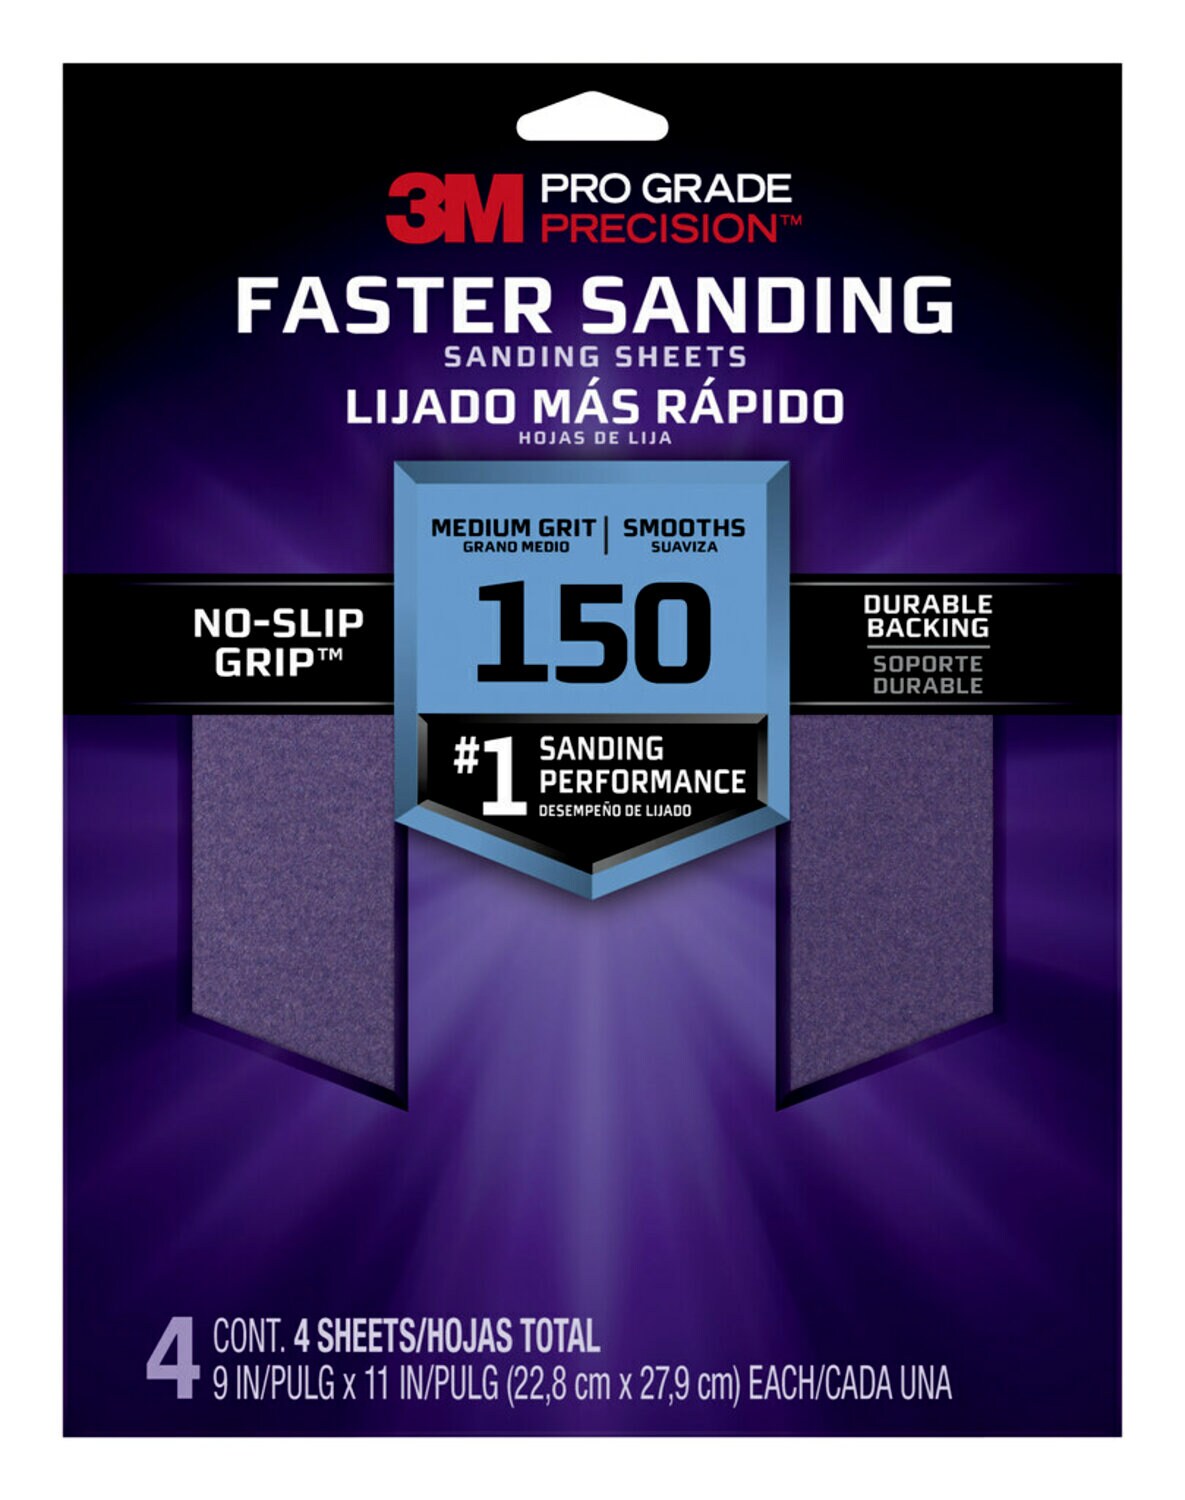 7100227429 - 3M Pro Grade Precision Faster Sanding Sanding Sheets 26150PGP-4, 9 in x 11 in, 150 grit, Medium, 4/pk